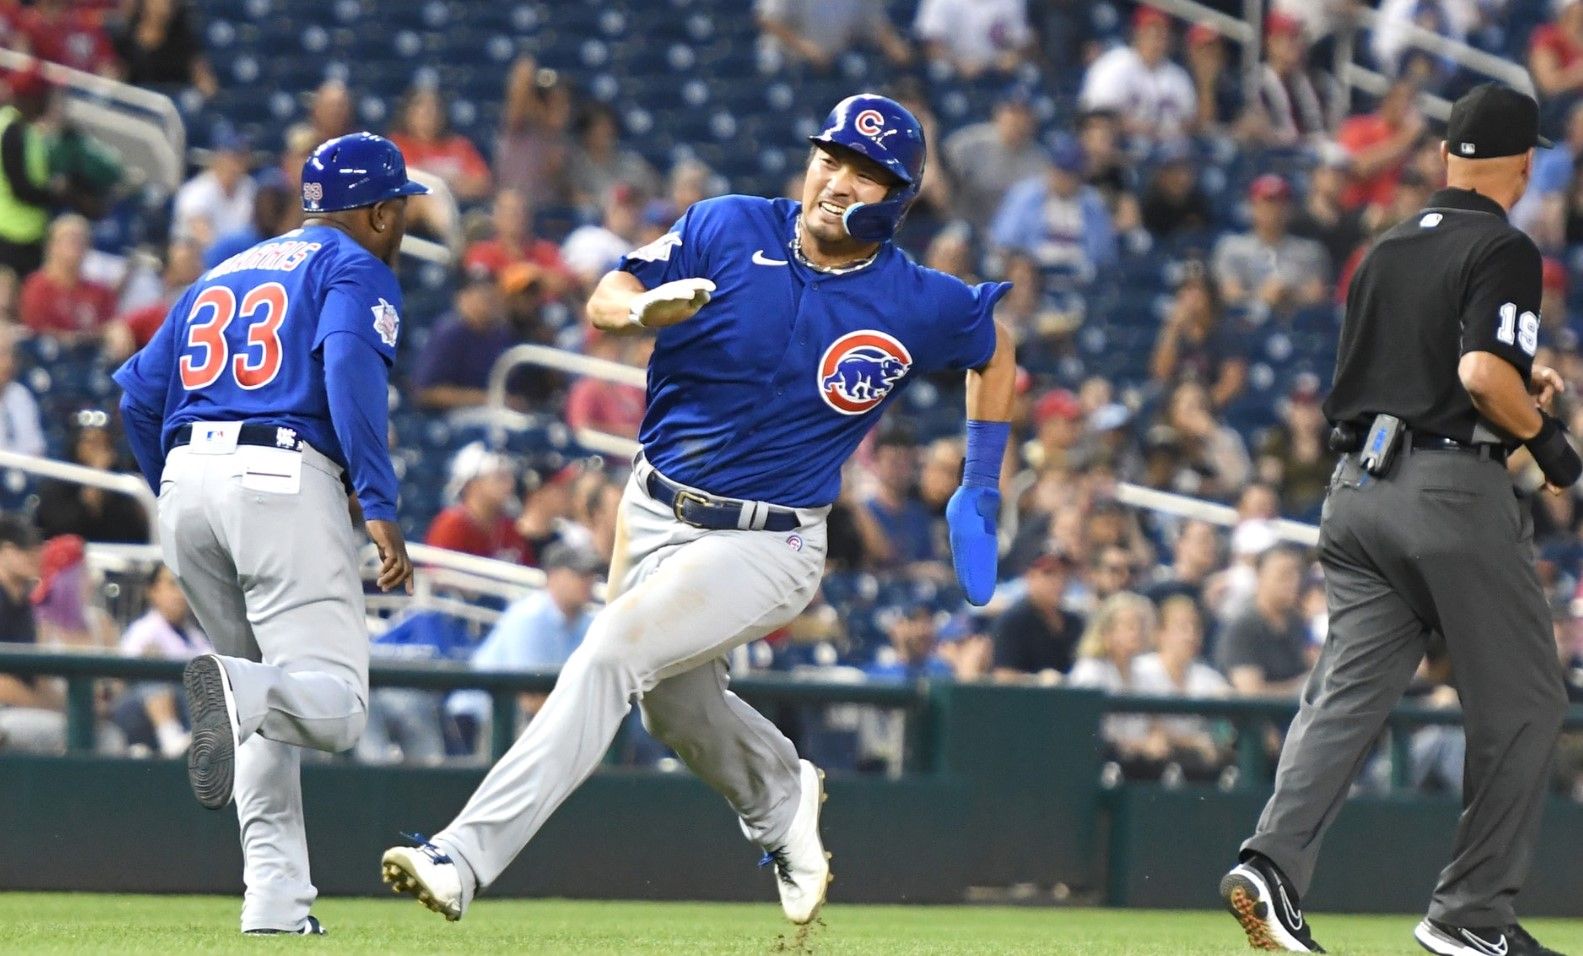 Wisdom's double in 11th propels Cubs to 7-5 win over Nats